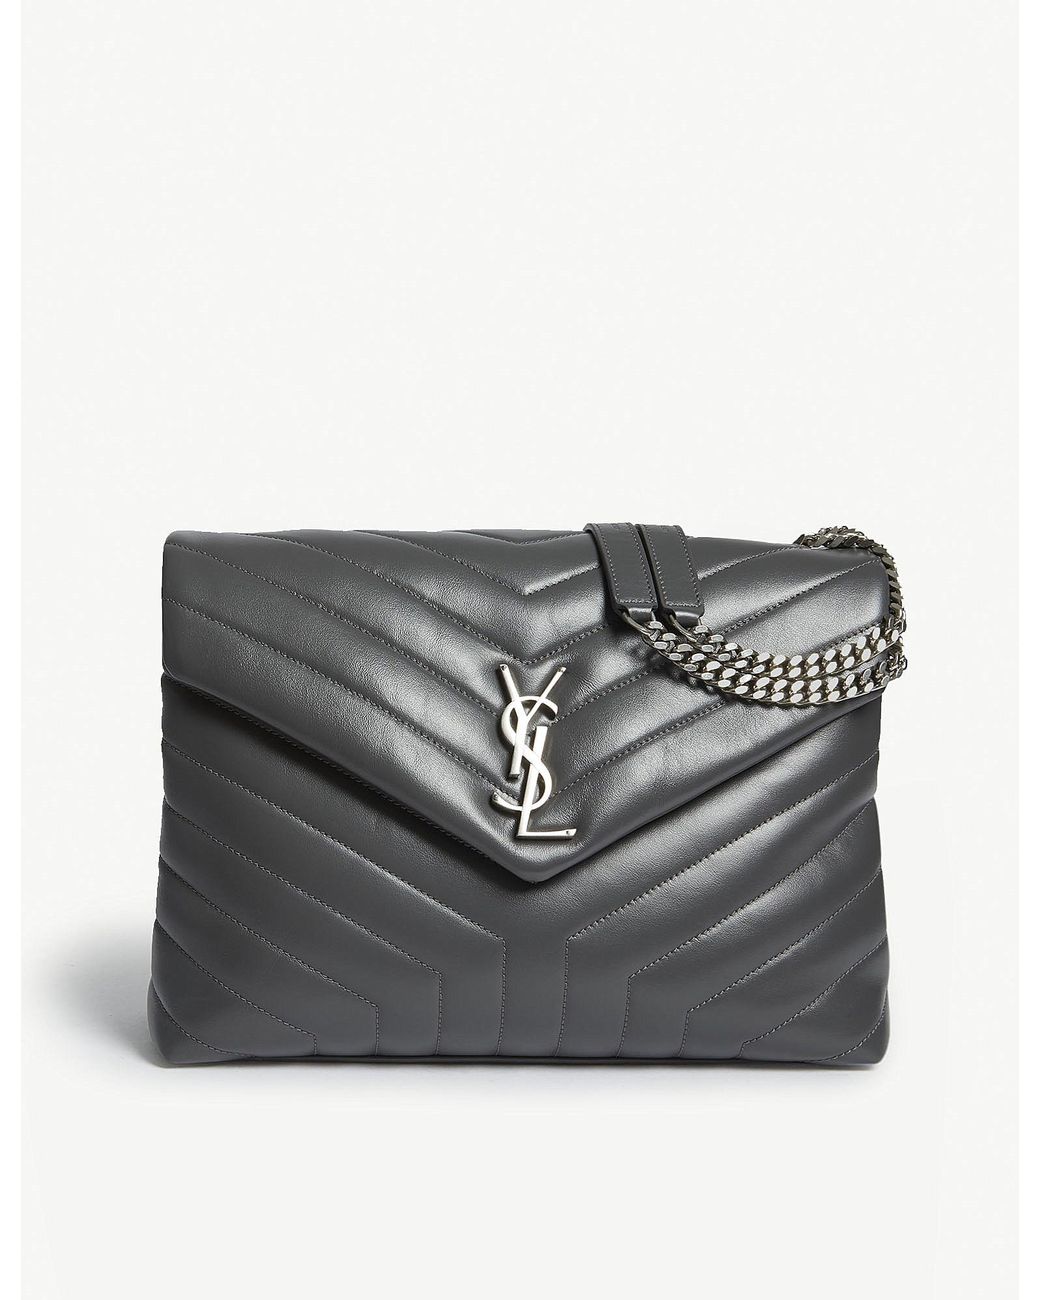 ysl.loulou small